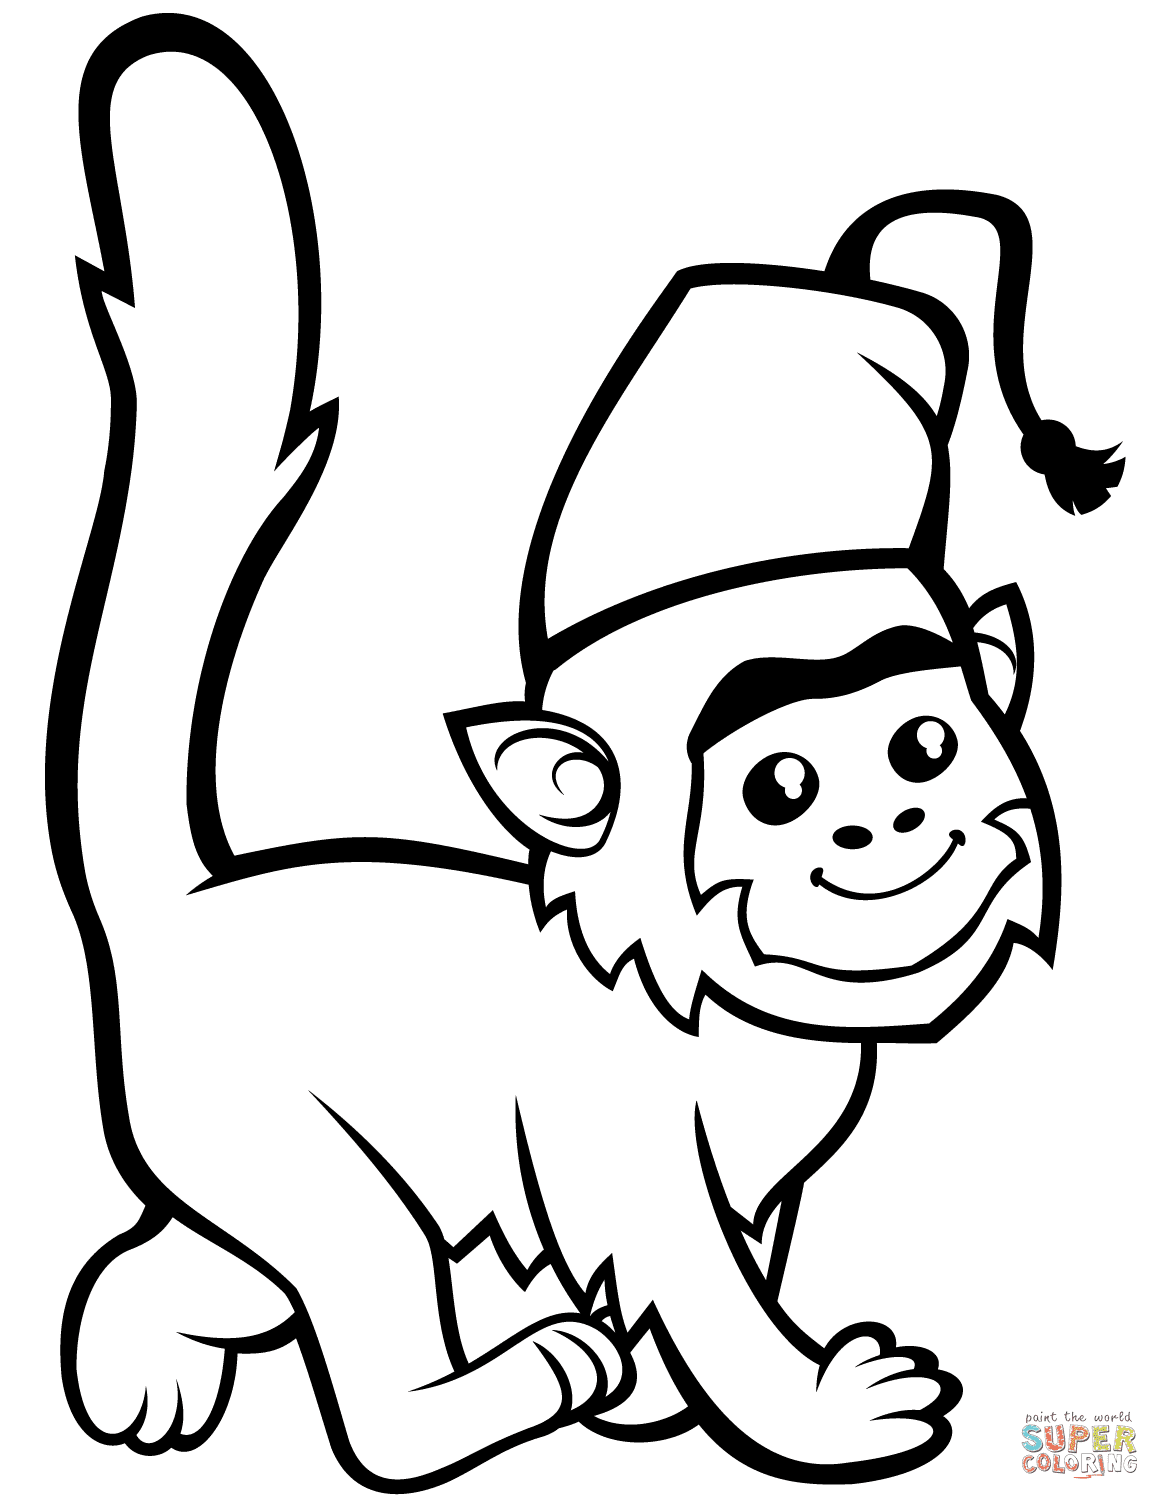 Cute Monkey in Fez Coloring Page